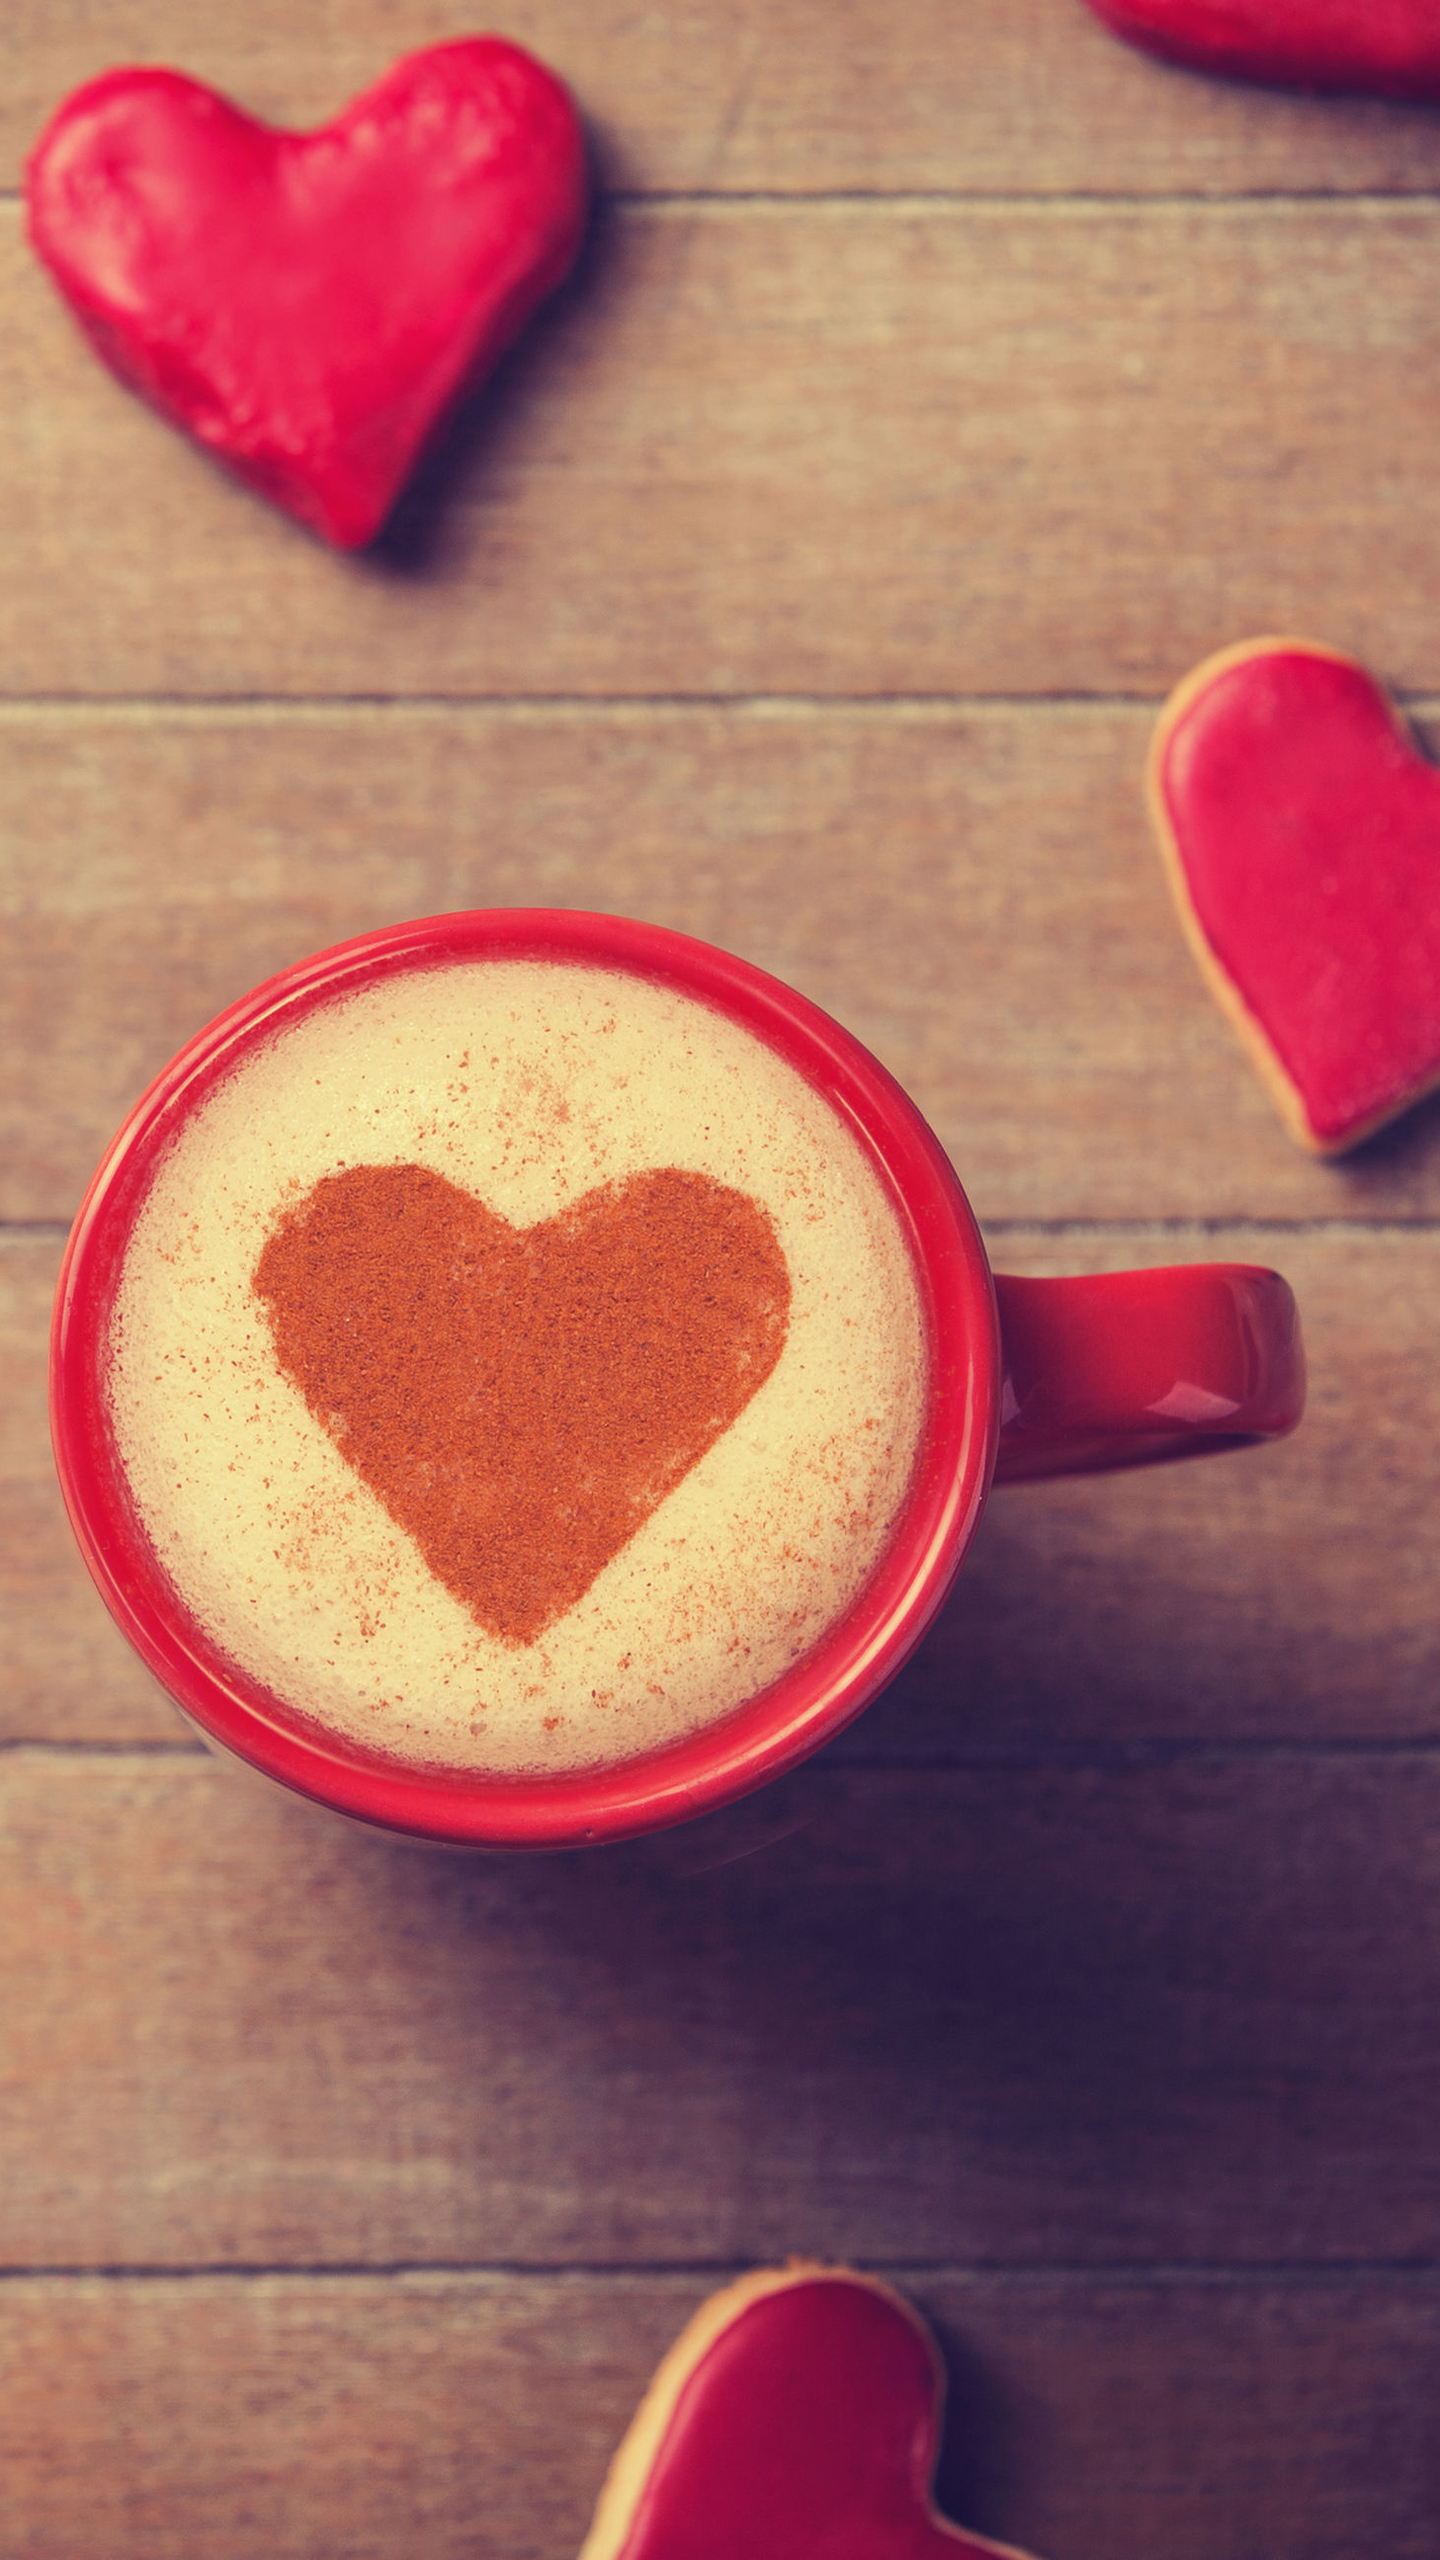 Sweet Valentines Day Coffee Heart - Sweet Wallpapers For Phones Hd - HD Wallpaper 